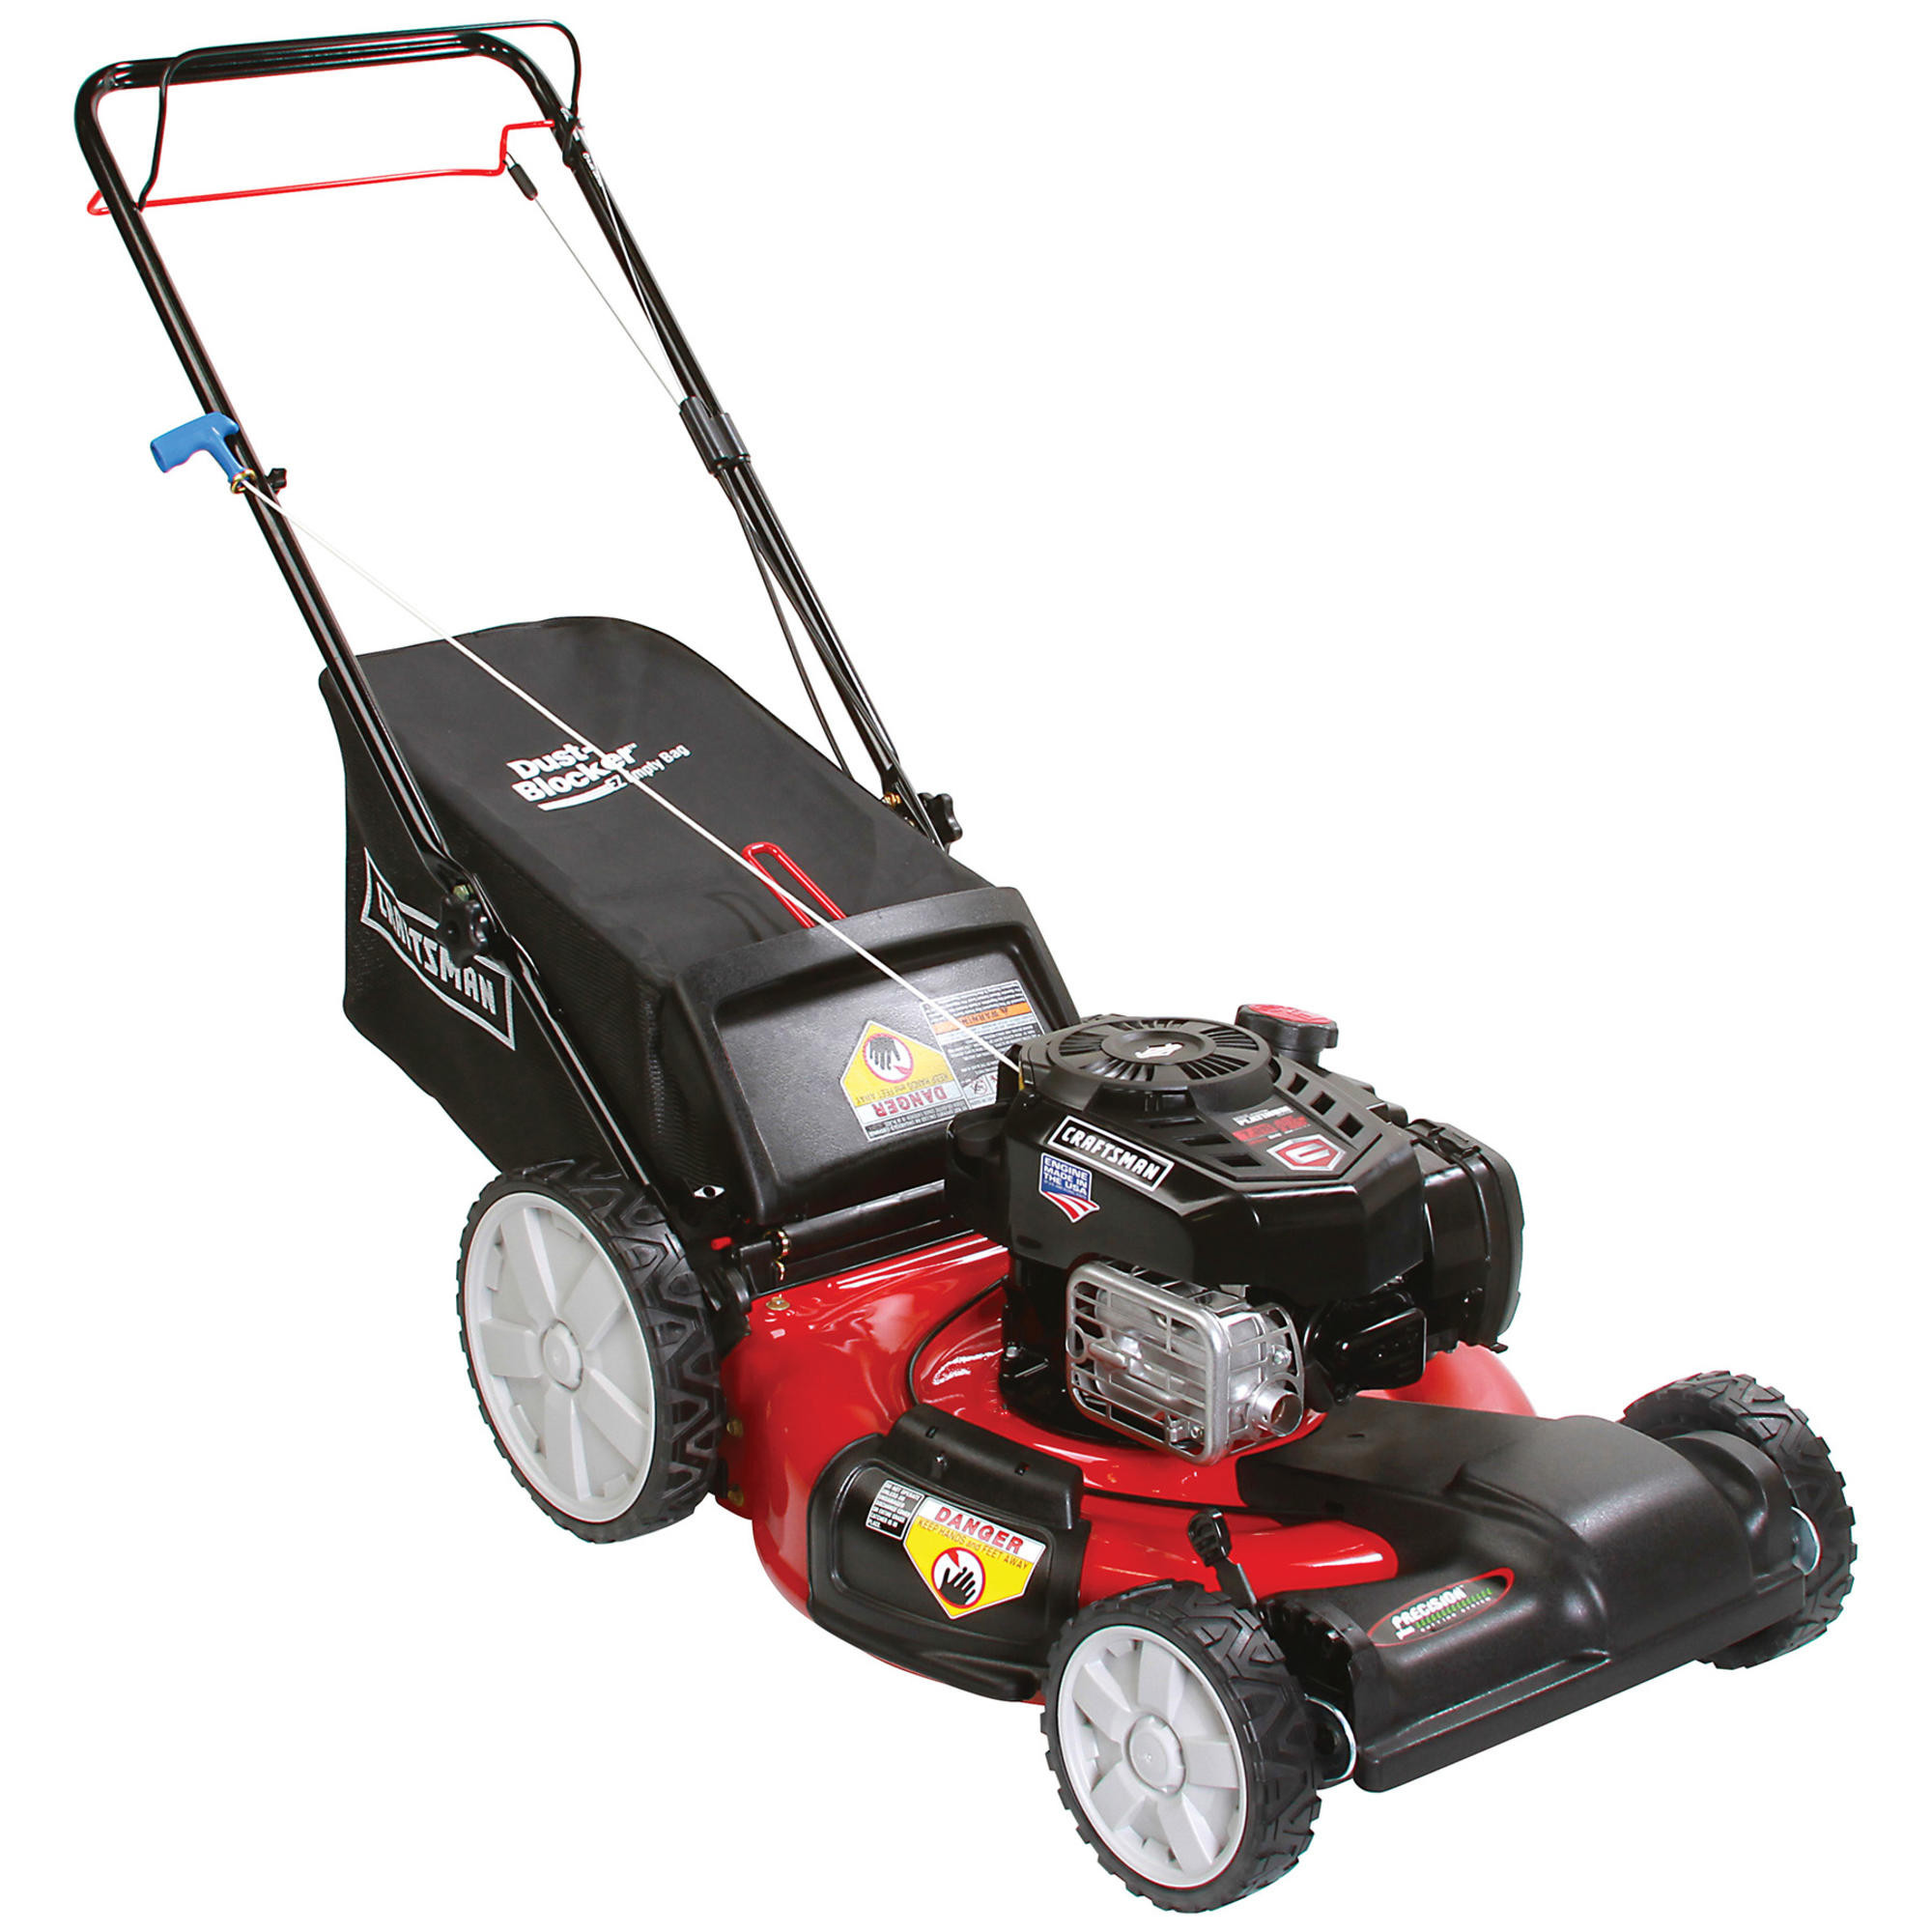 Craftsman 37705 163cc 21" Just Check & Add Front Wheel Drive Lawn Mower